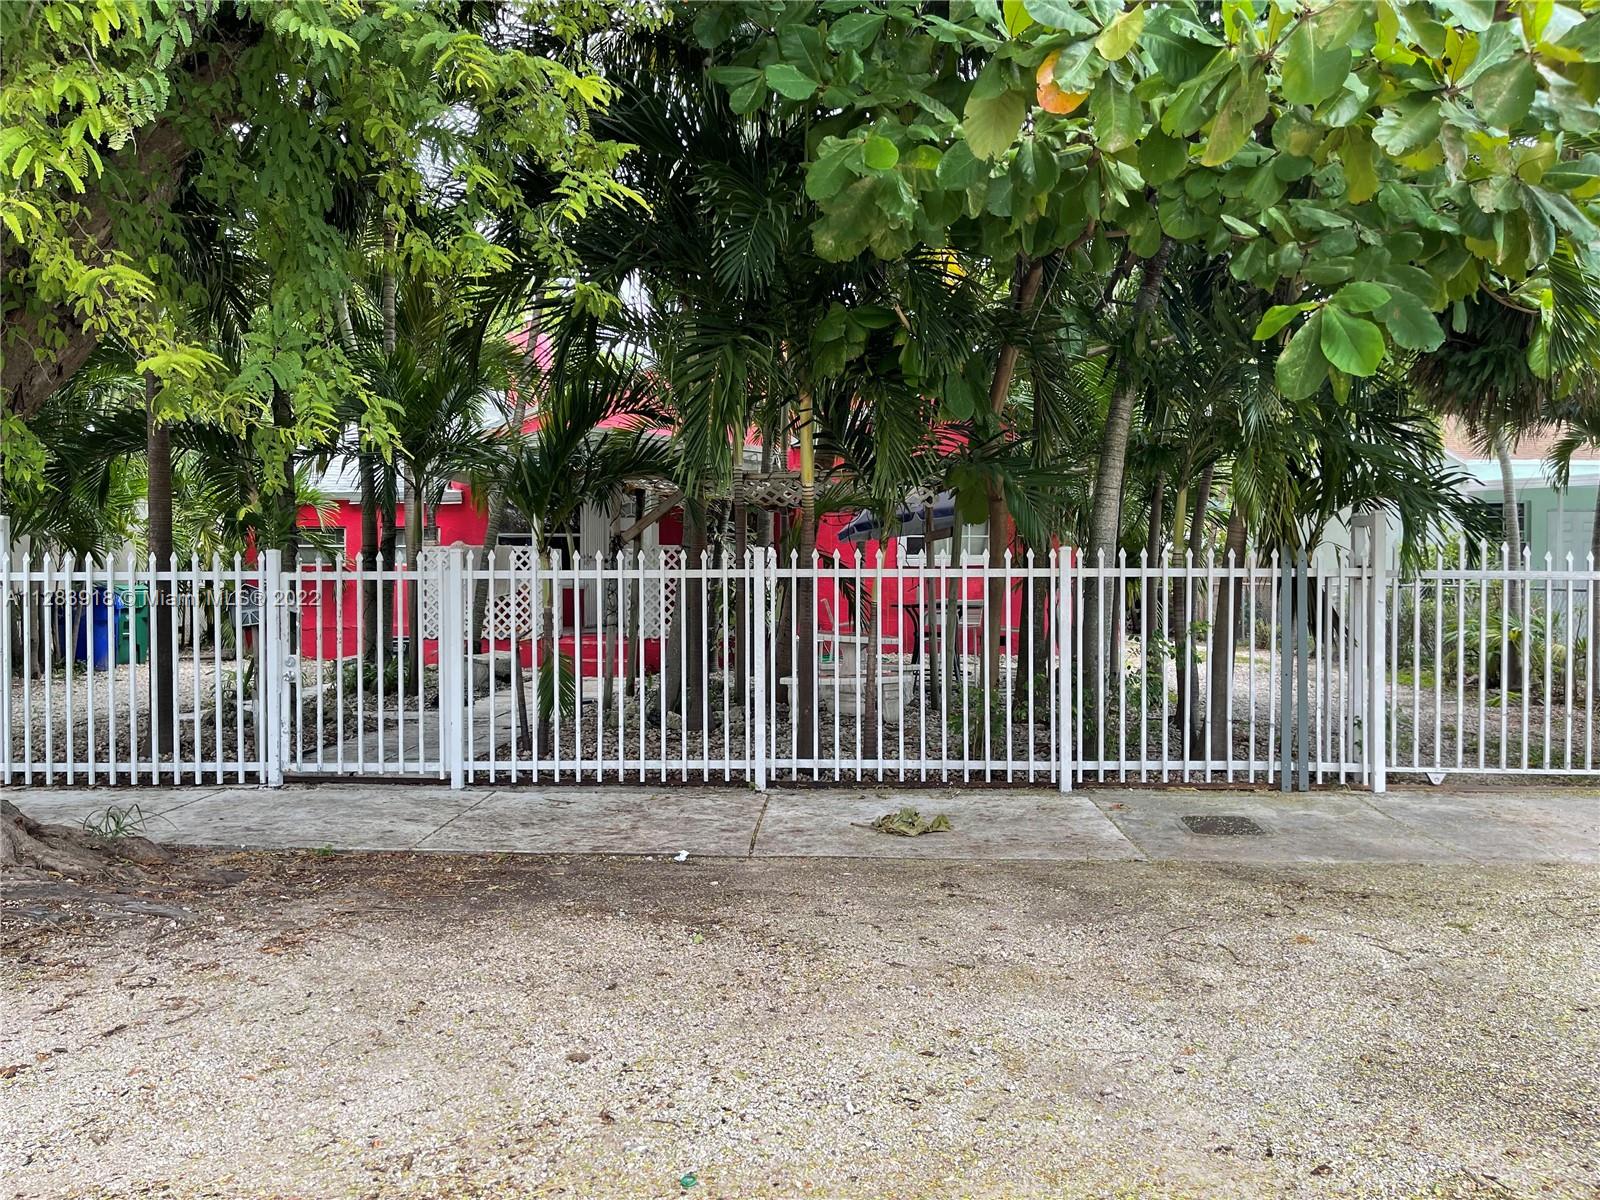 a view of a fence